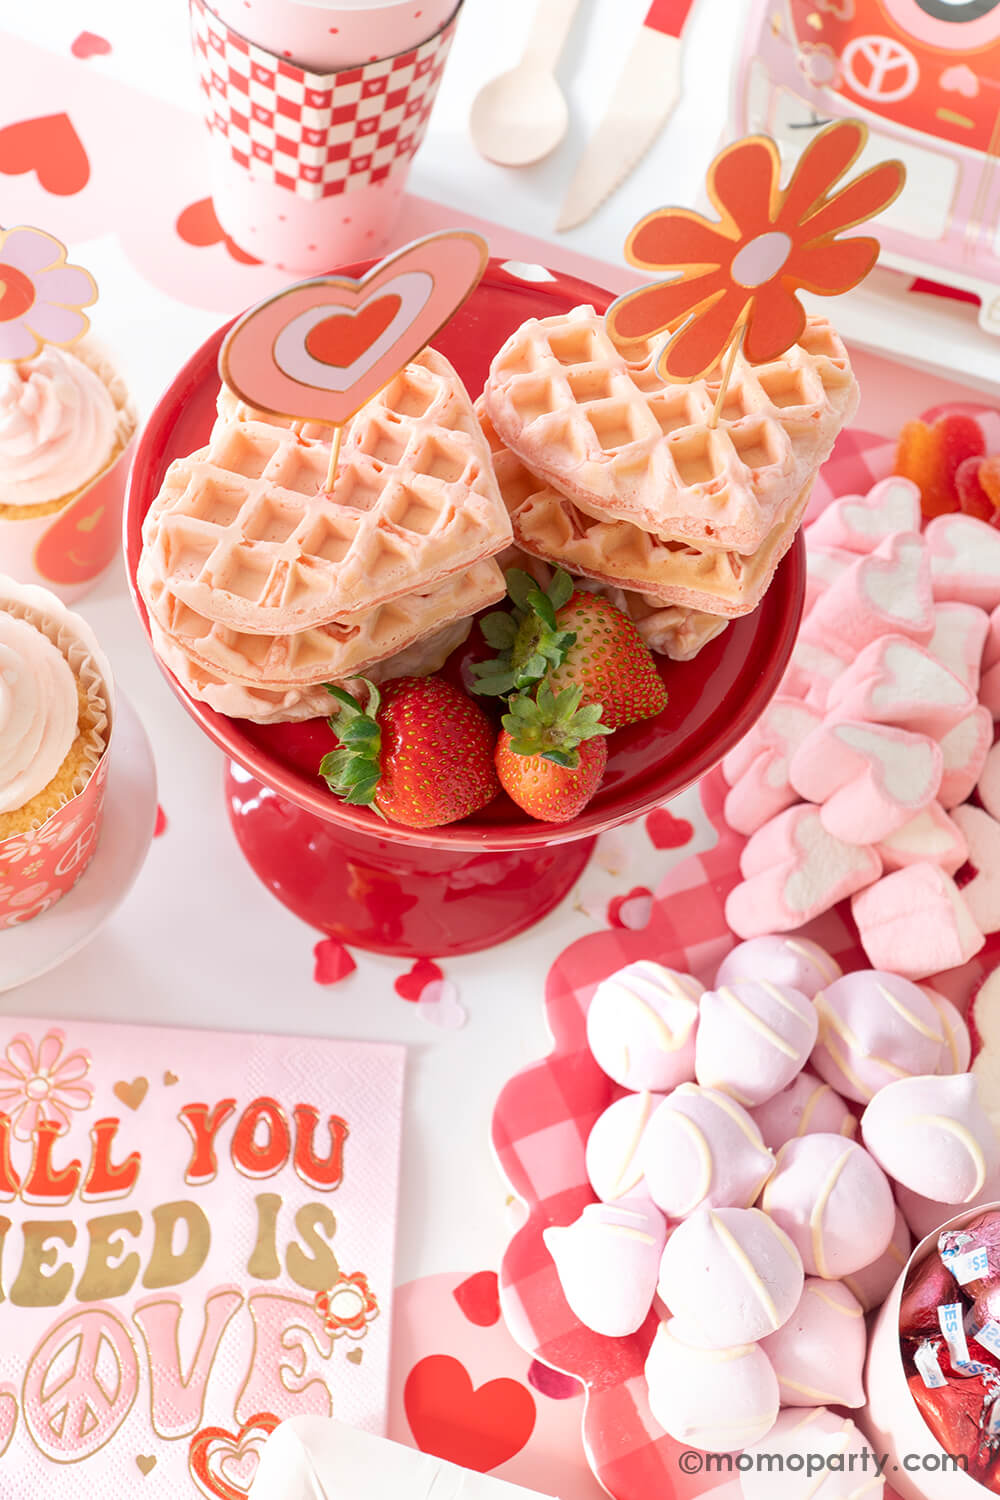 Hearts Valentine's Day Cup - Ultimate Party Super Stores